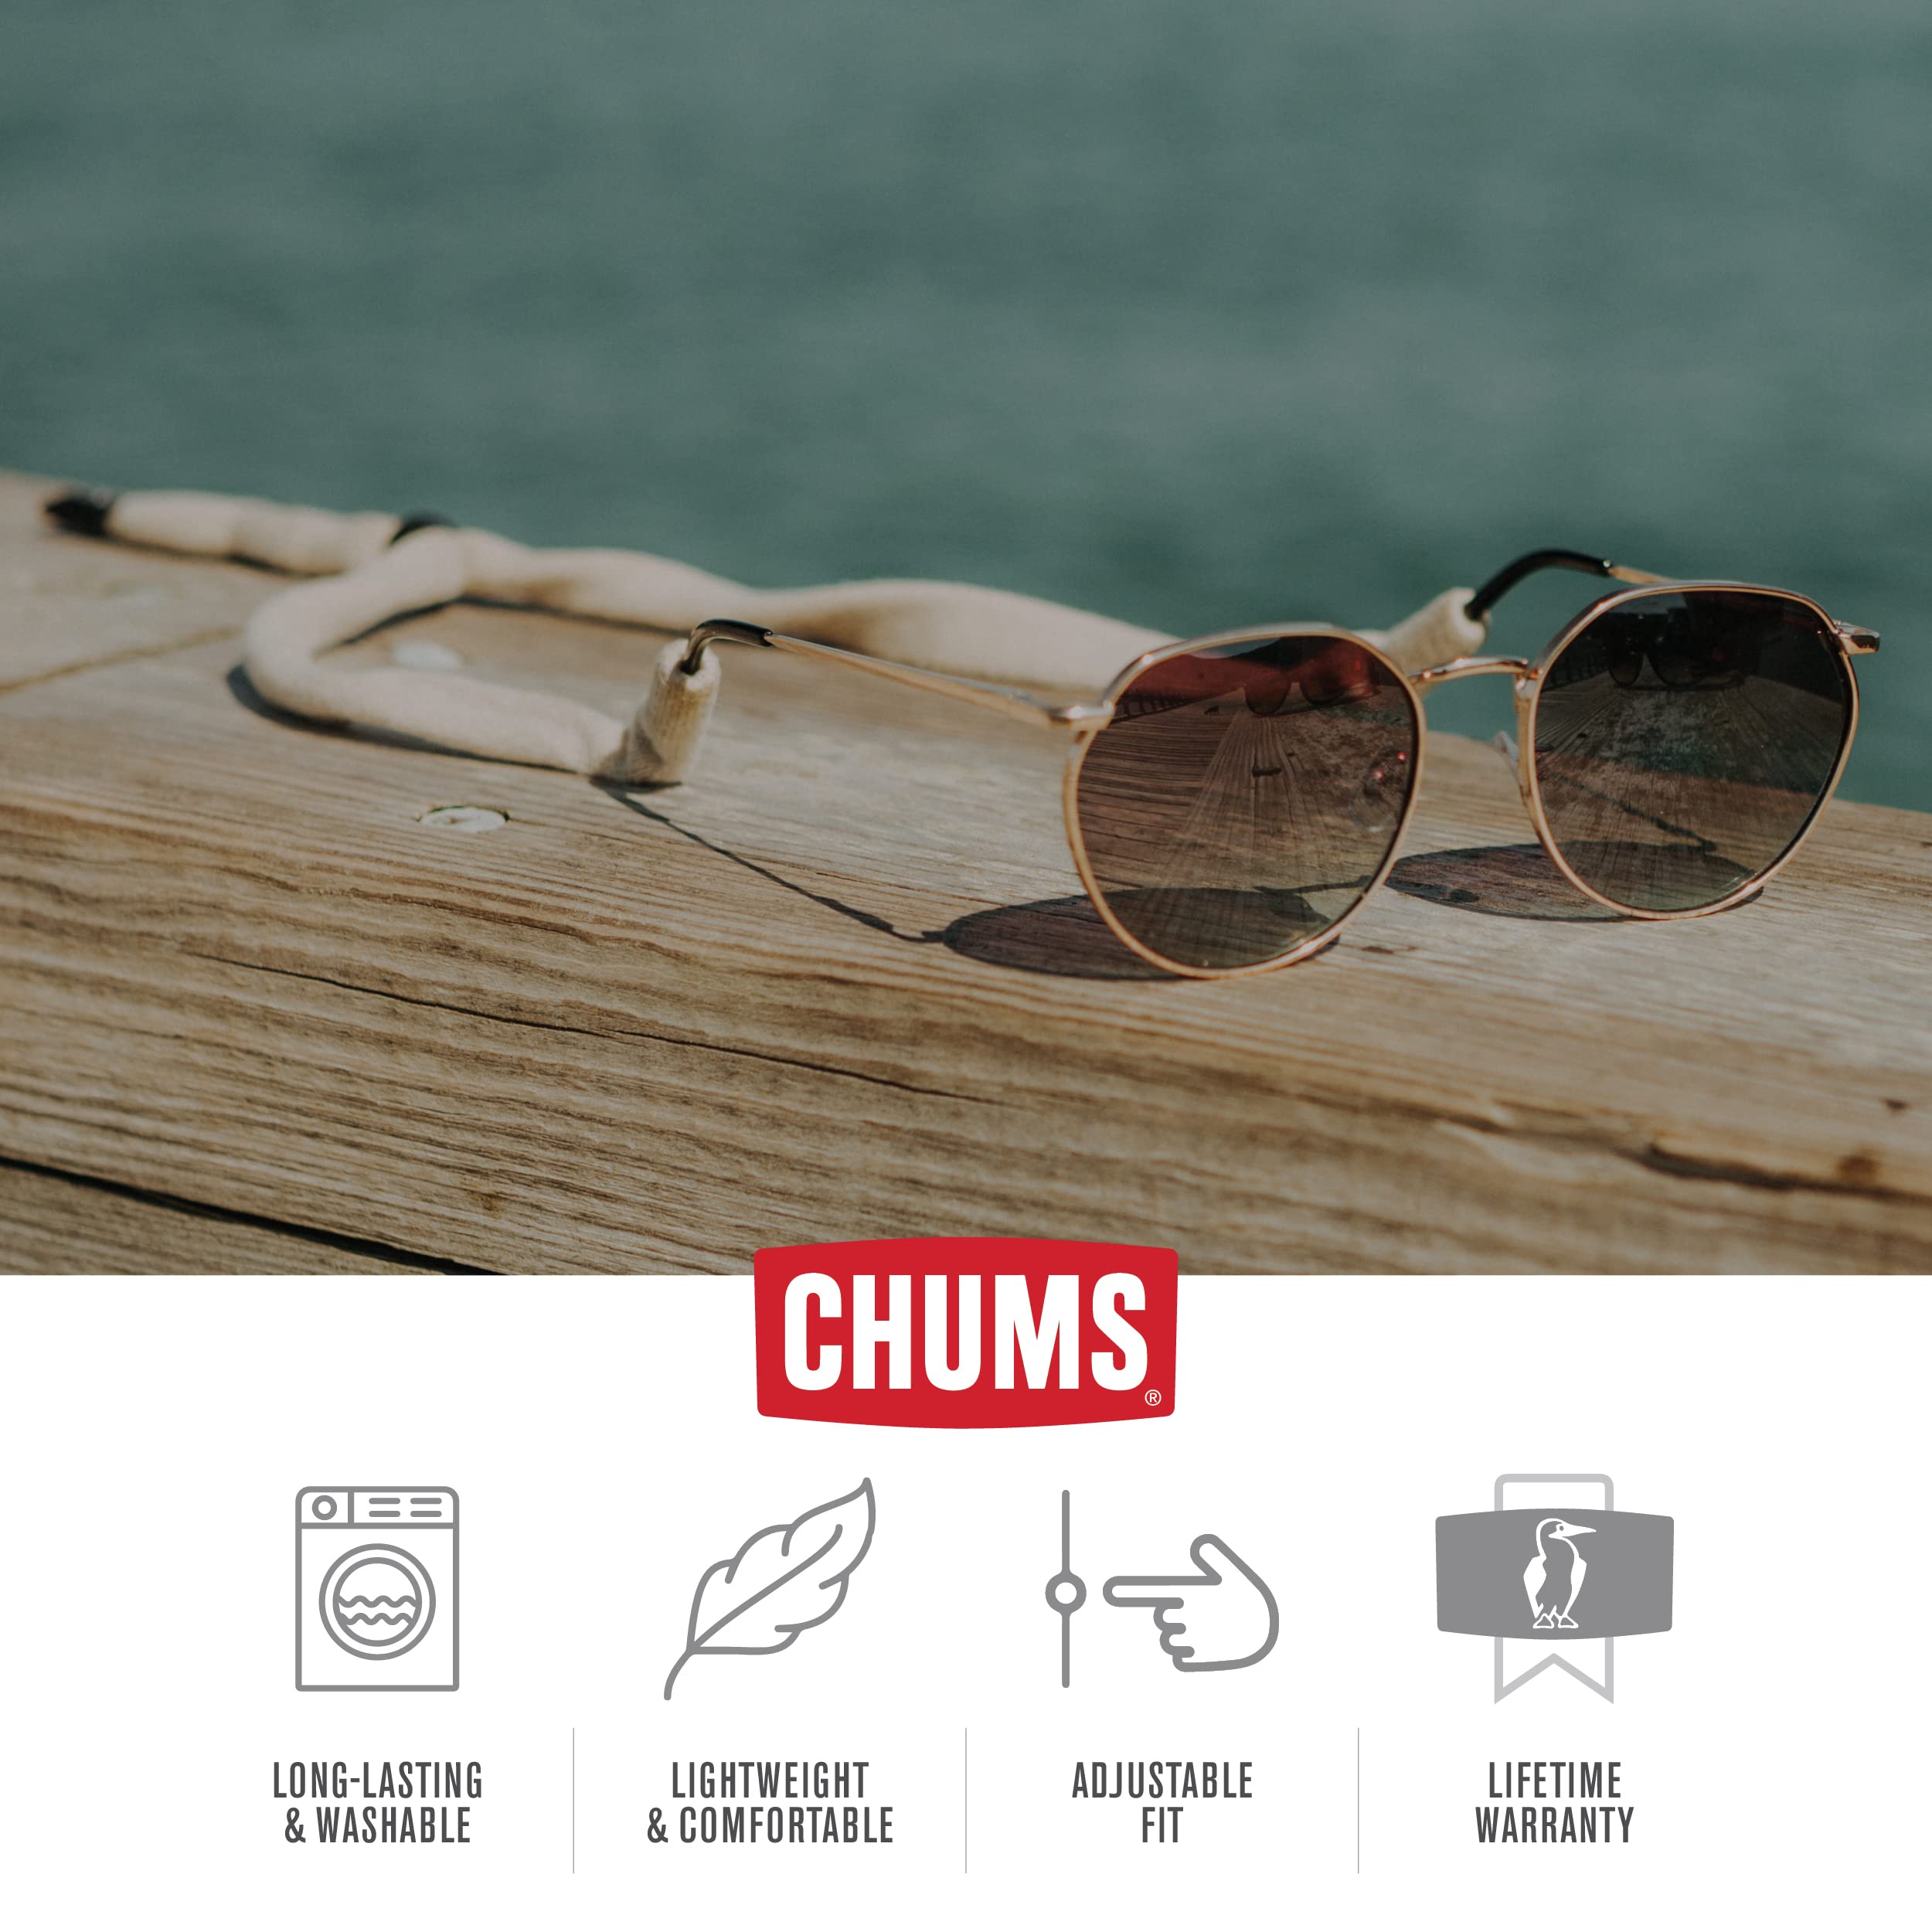 Chums Original Large Frame Cotton Retainer - Unisex Eyewear Keeper for Sunglasses & Glasses - Adjustable Fit, Washable & Made in USA (Large-End, Black)